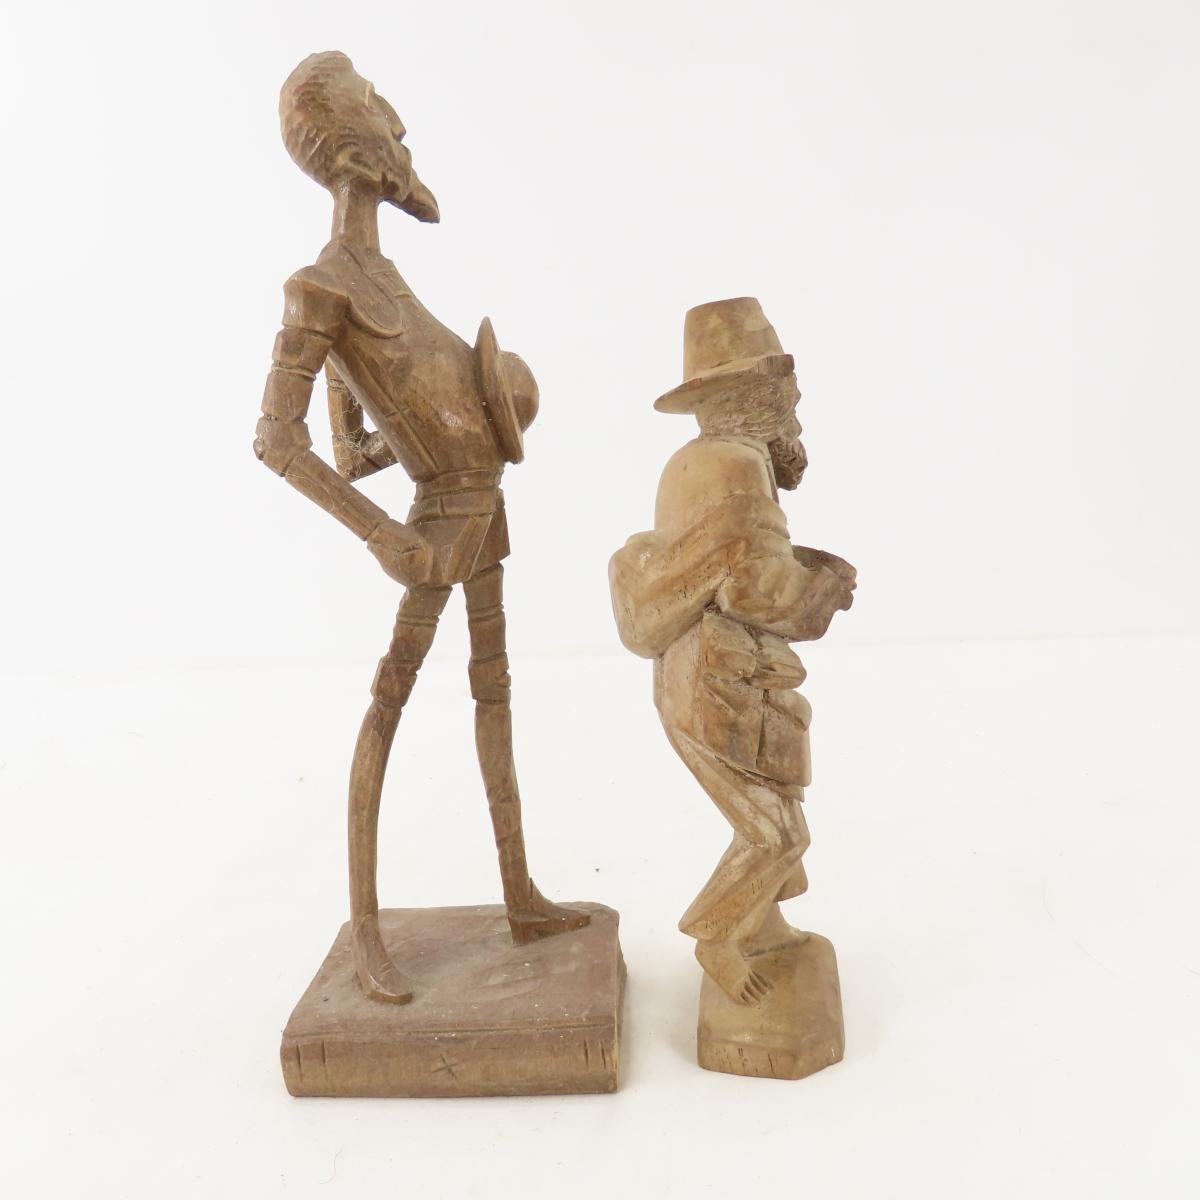 Wooden Sculptures, figures, boxes and more